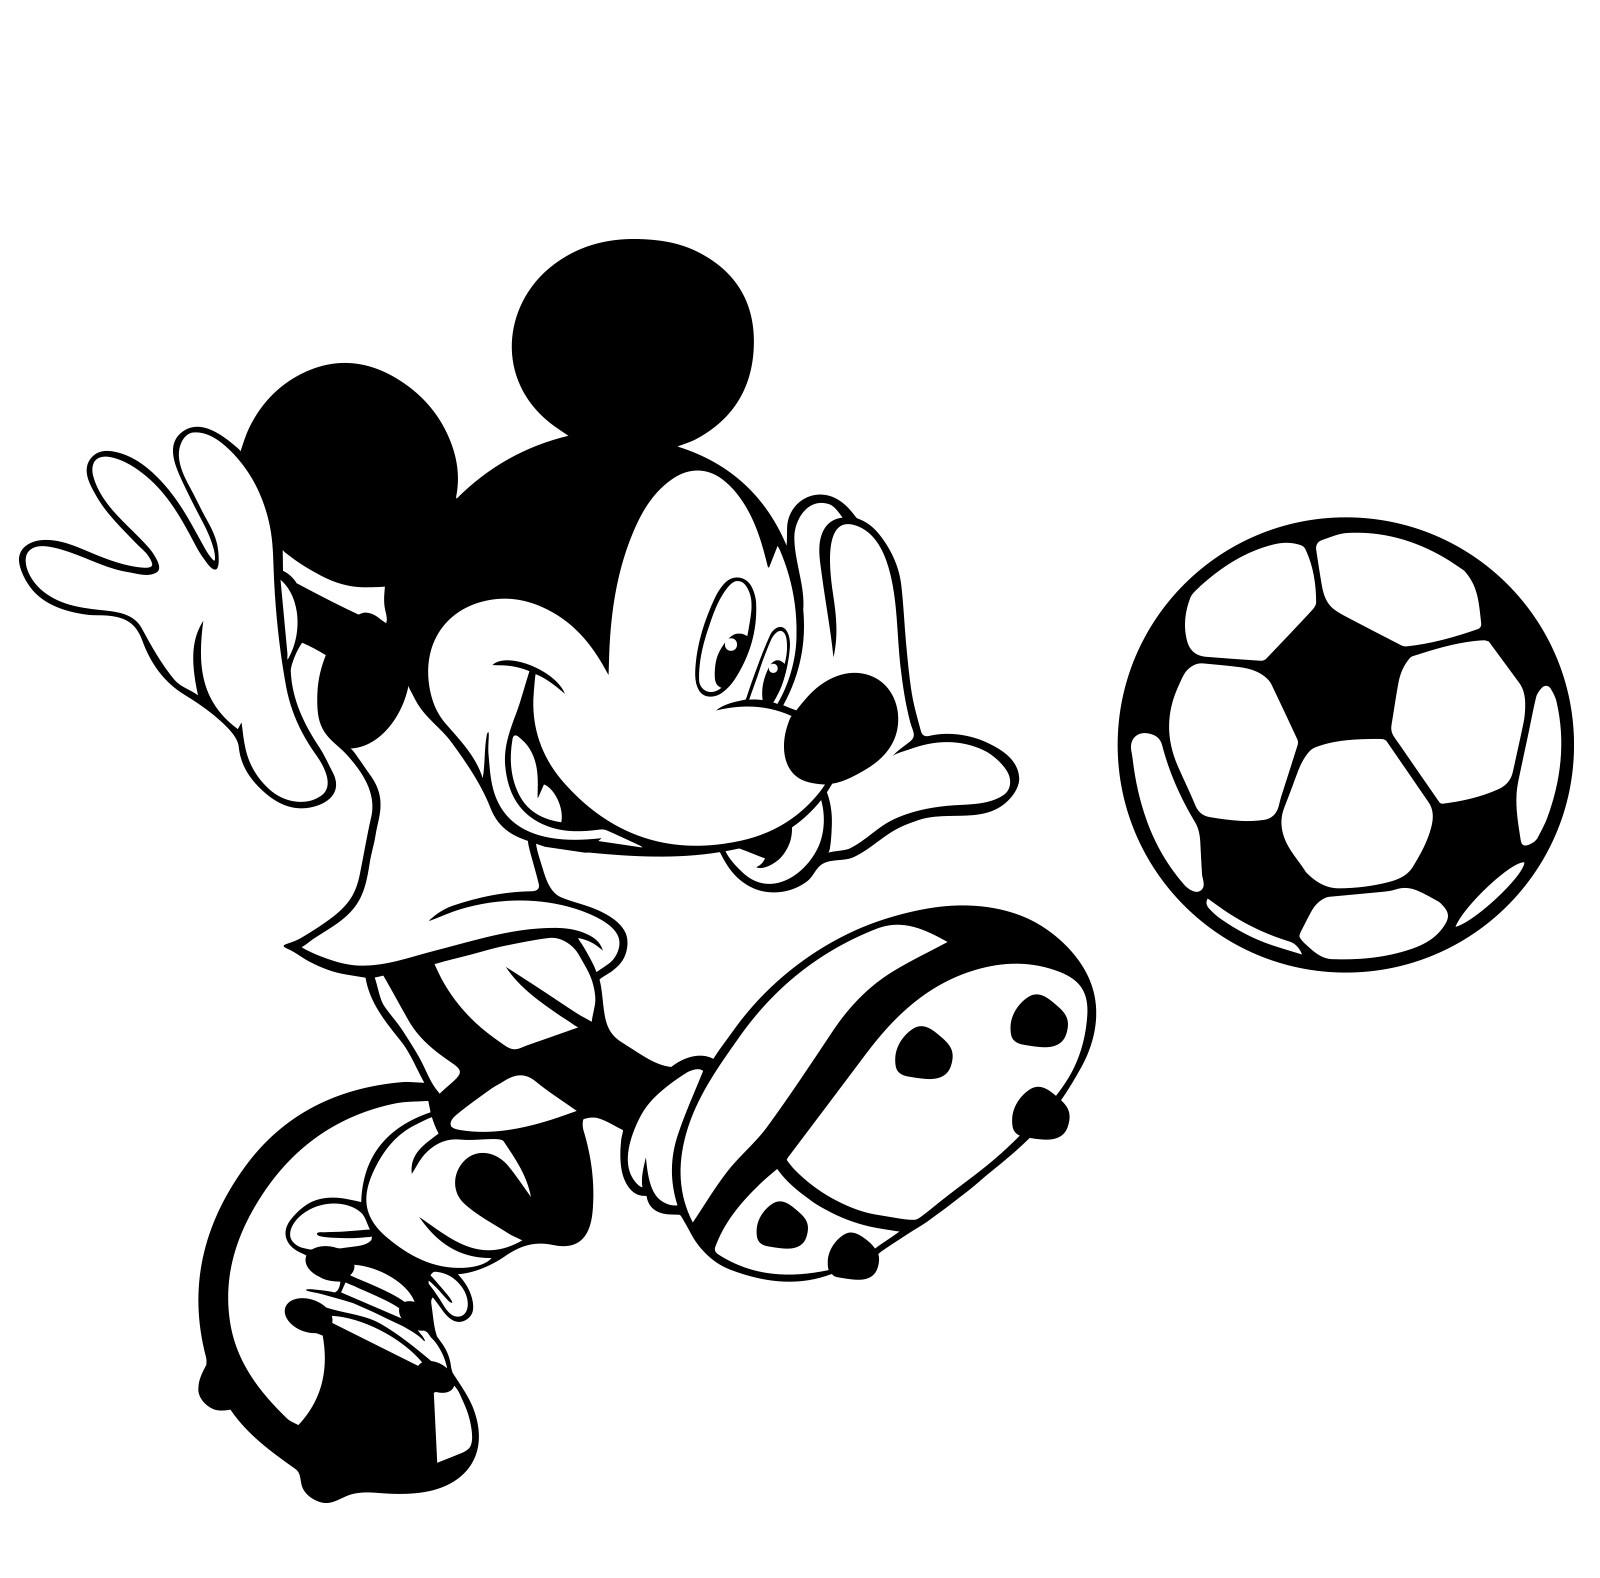 Free Mickey Mouse Black And White, Download Free Clip Art, Free Clip